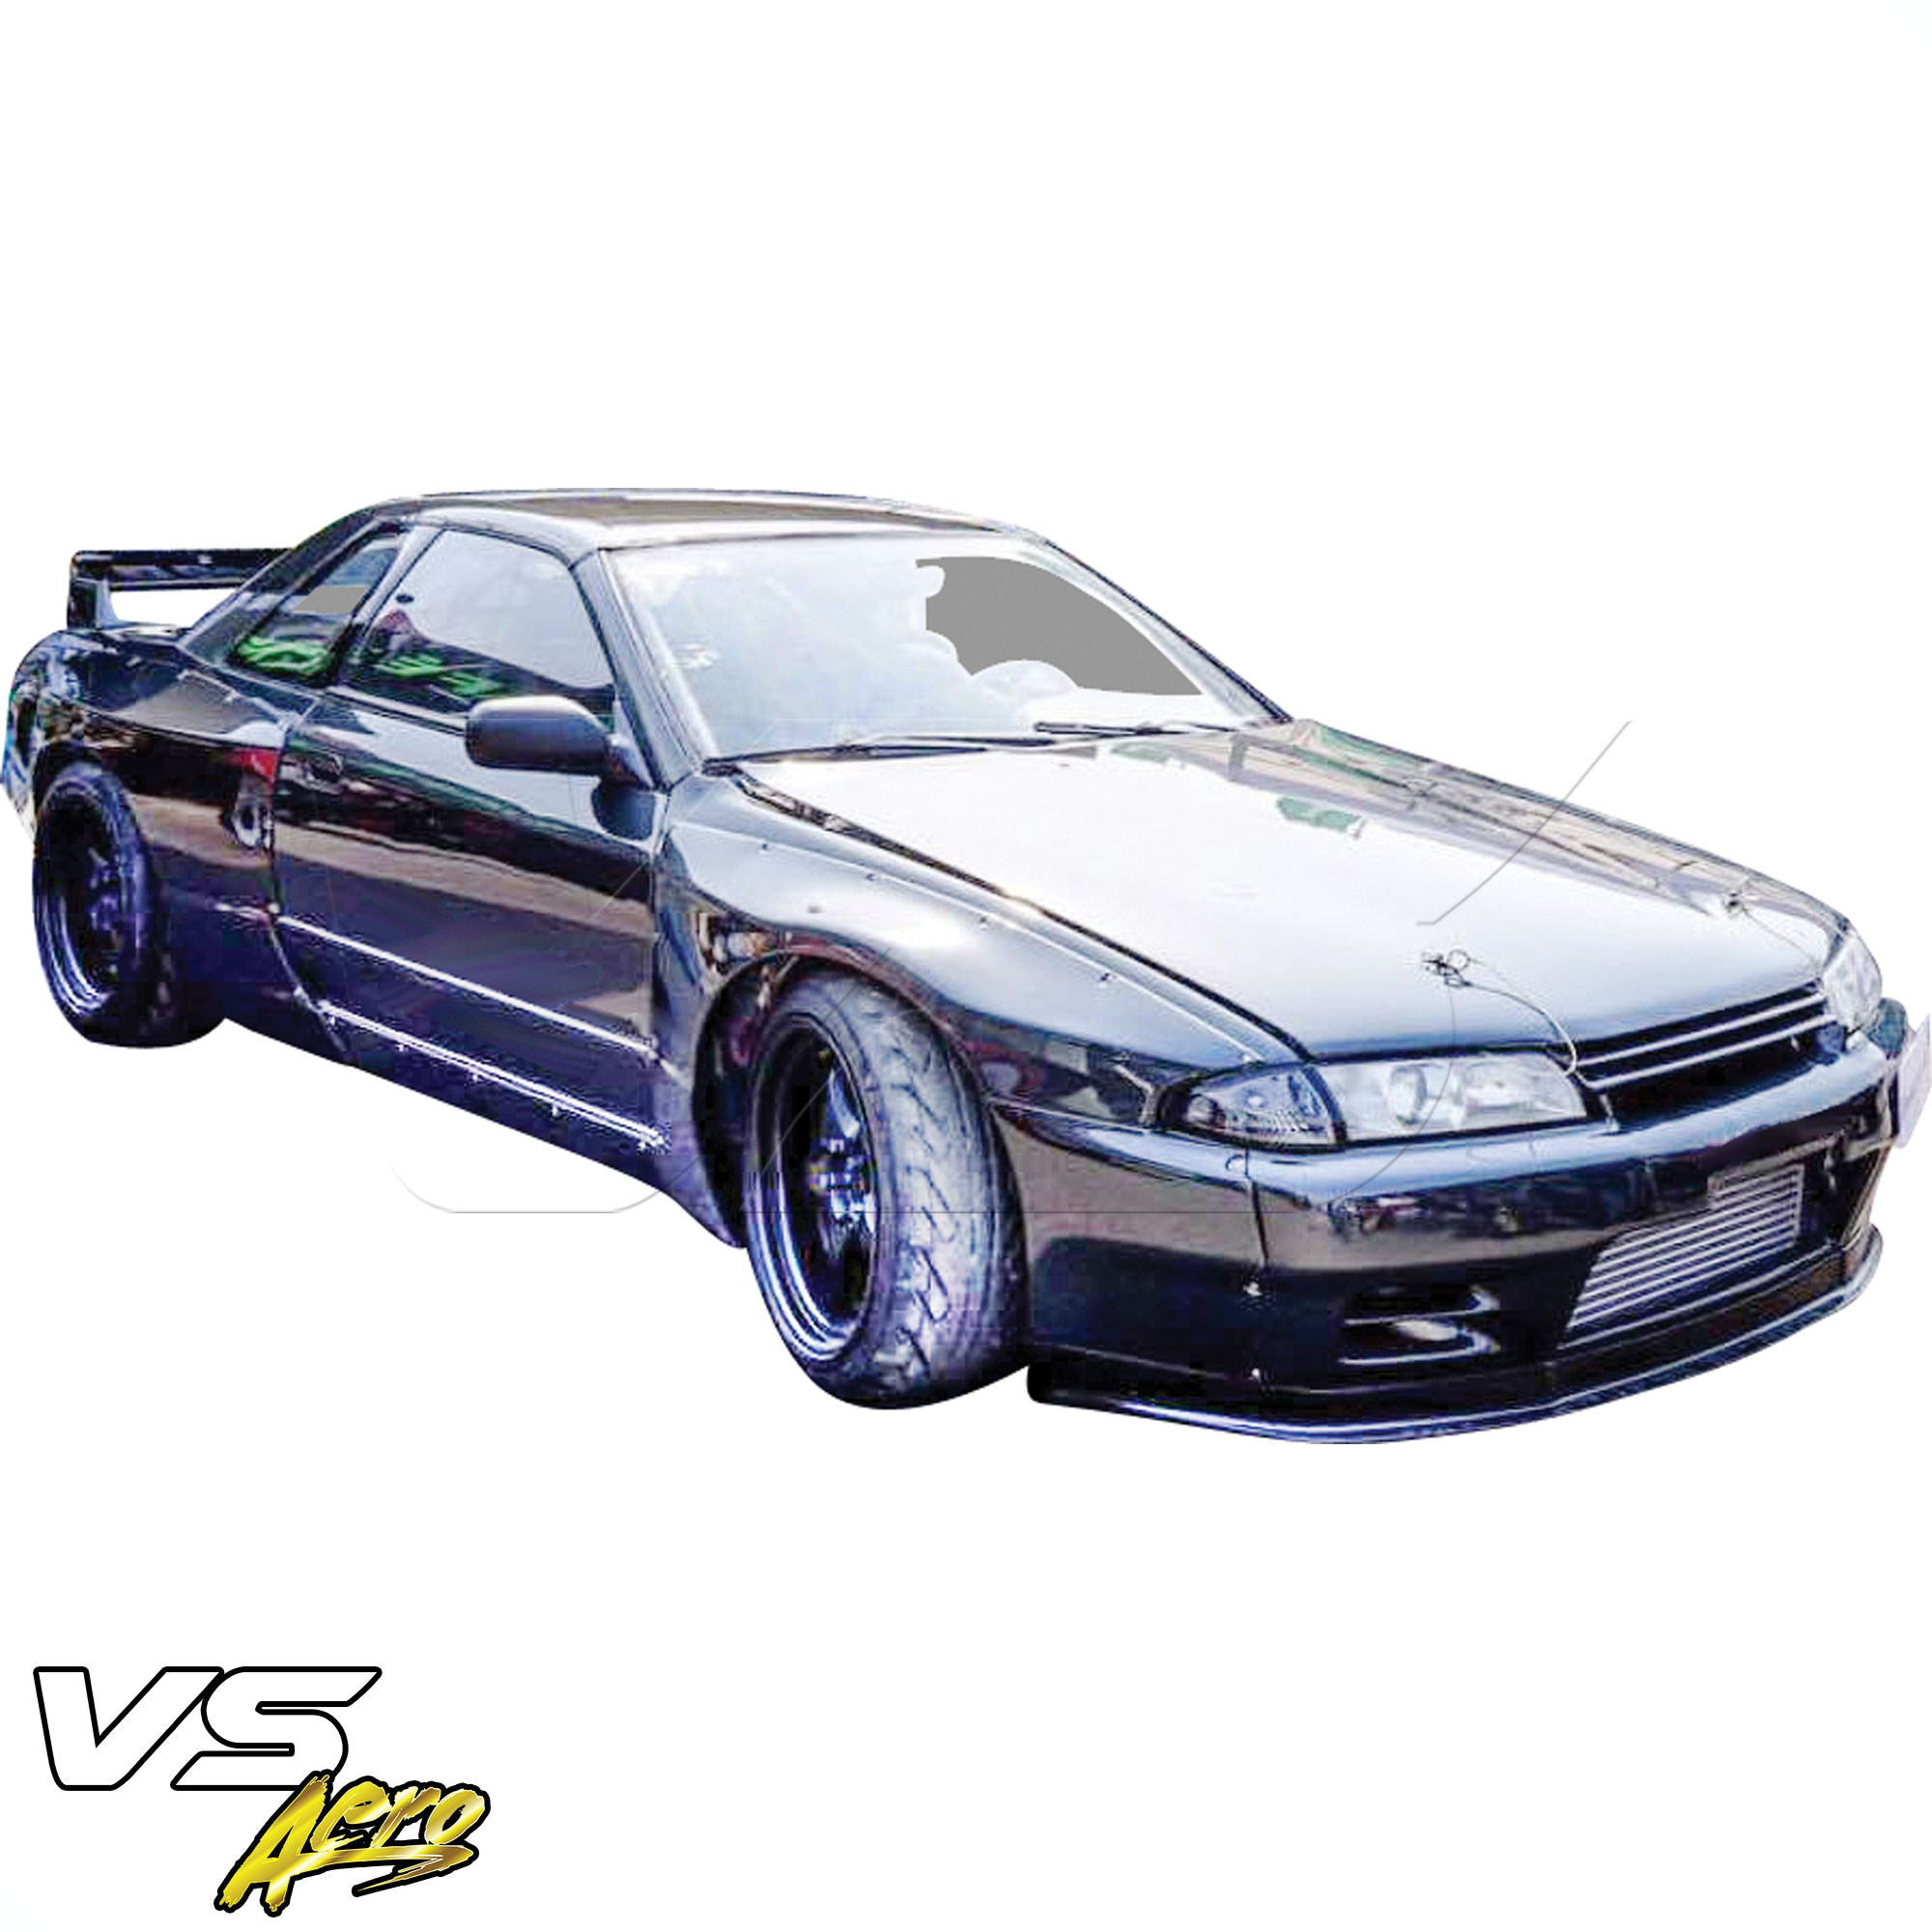 VSaero FRP TKYO Wide Body 40mm Fender Flares (front) 4pc > Nissan Skyline R32 1990-1994 > 2dr Coupe - Image 20